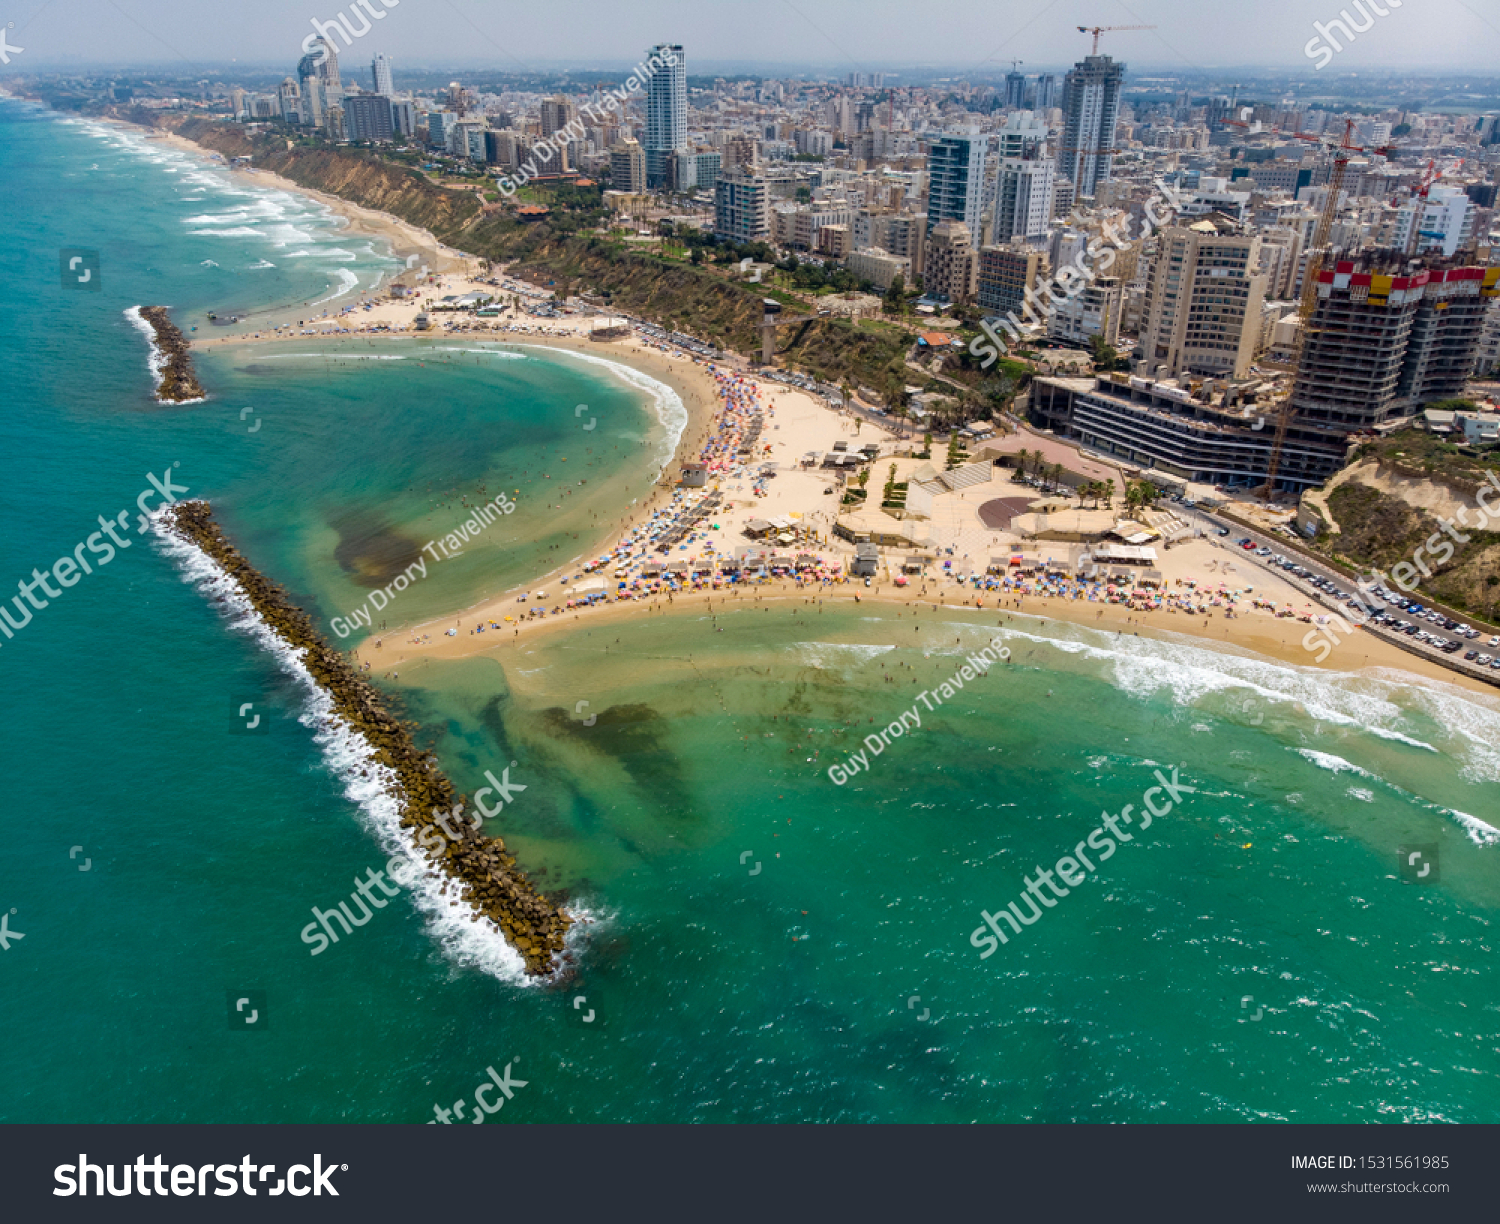 Netanya a city in the Northern Central District of Israel #1531561985